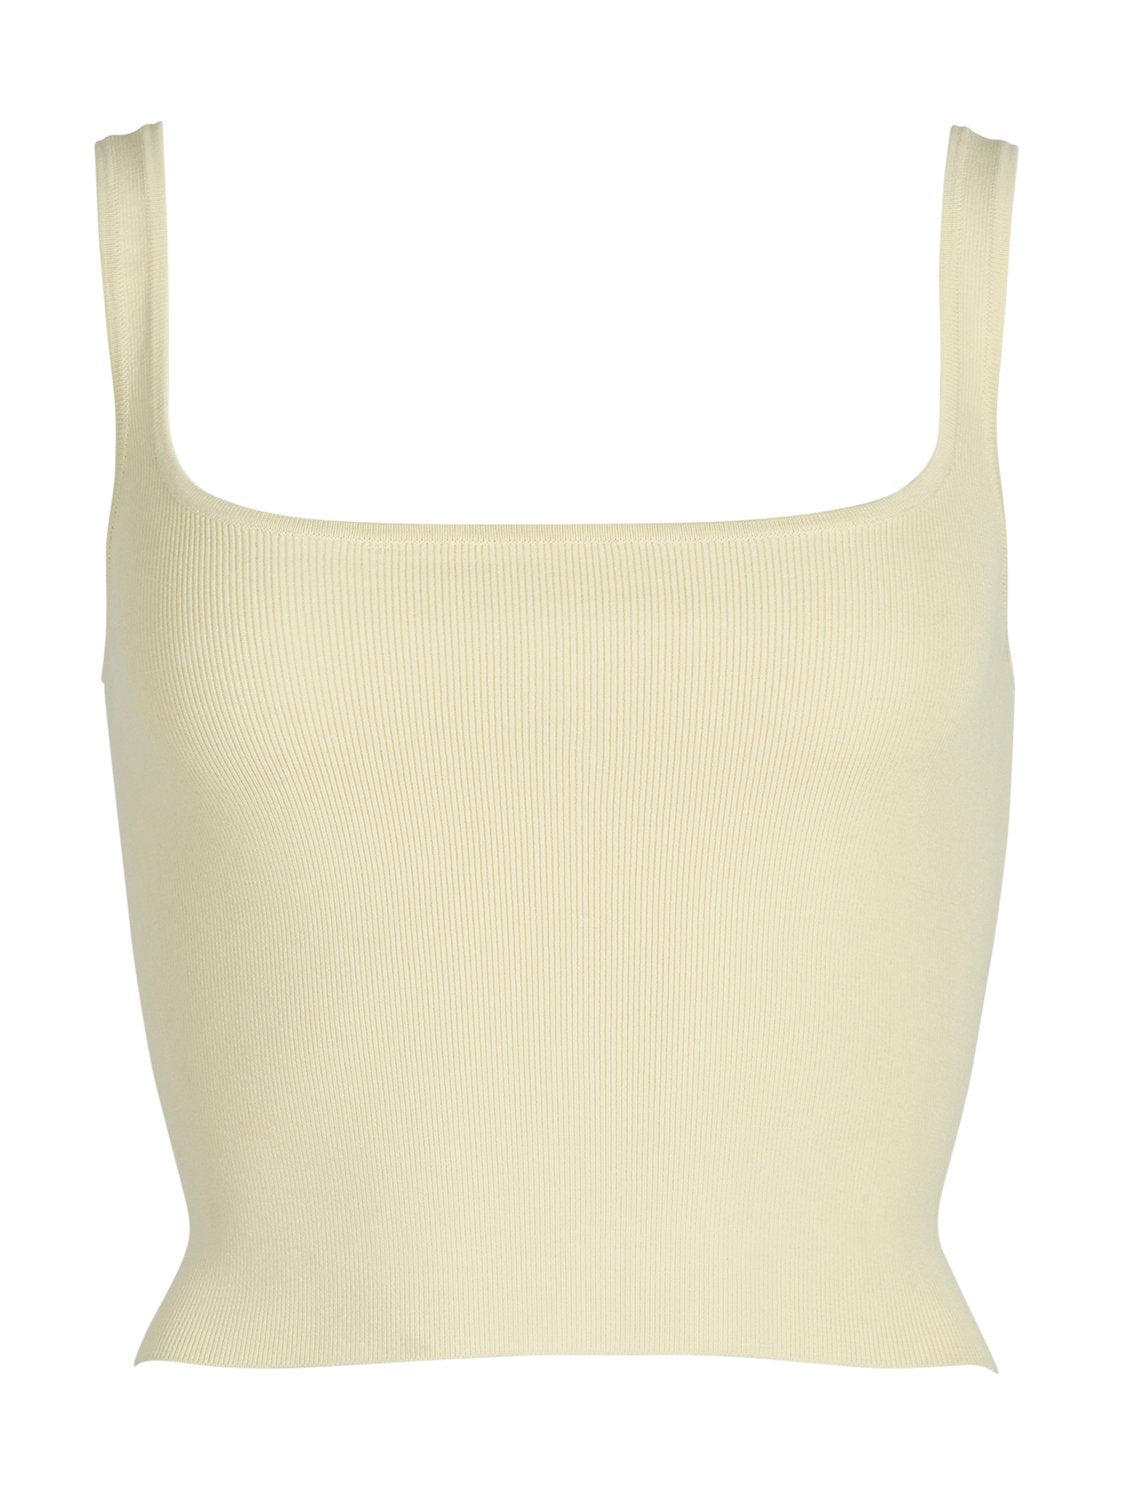 Evie Luxe Knit Tank - French Vanilla